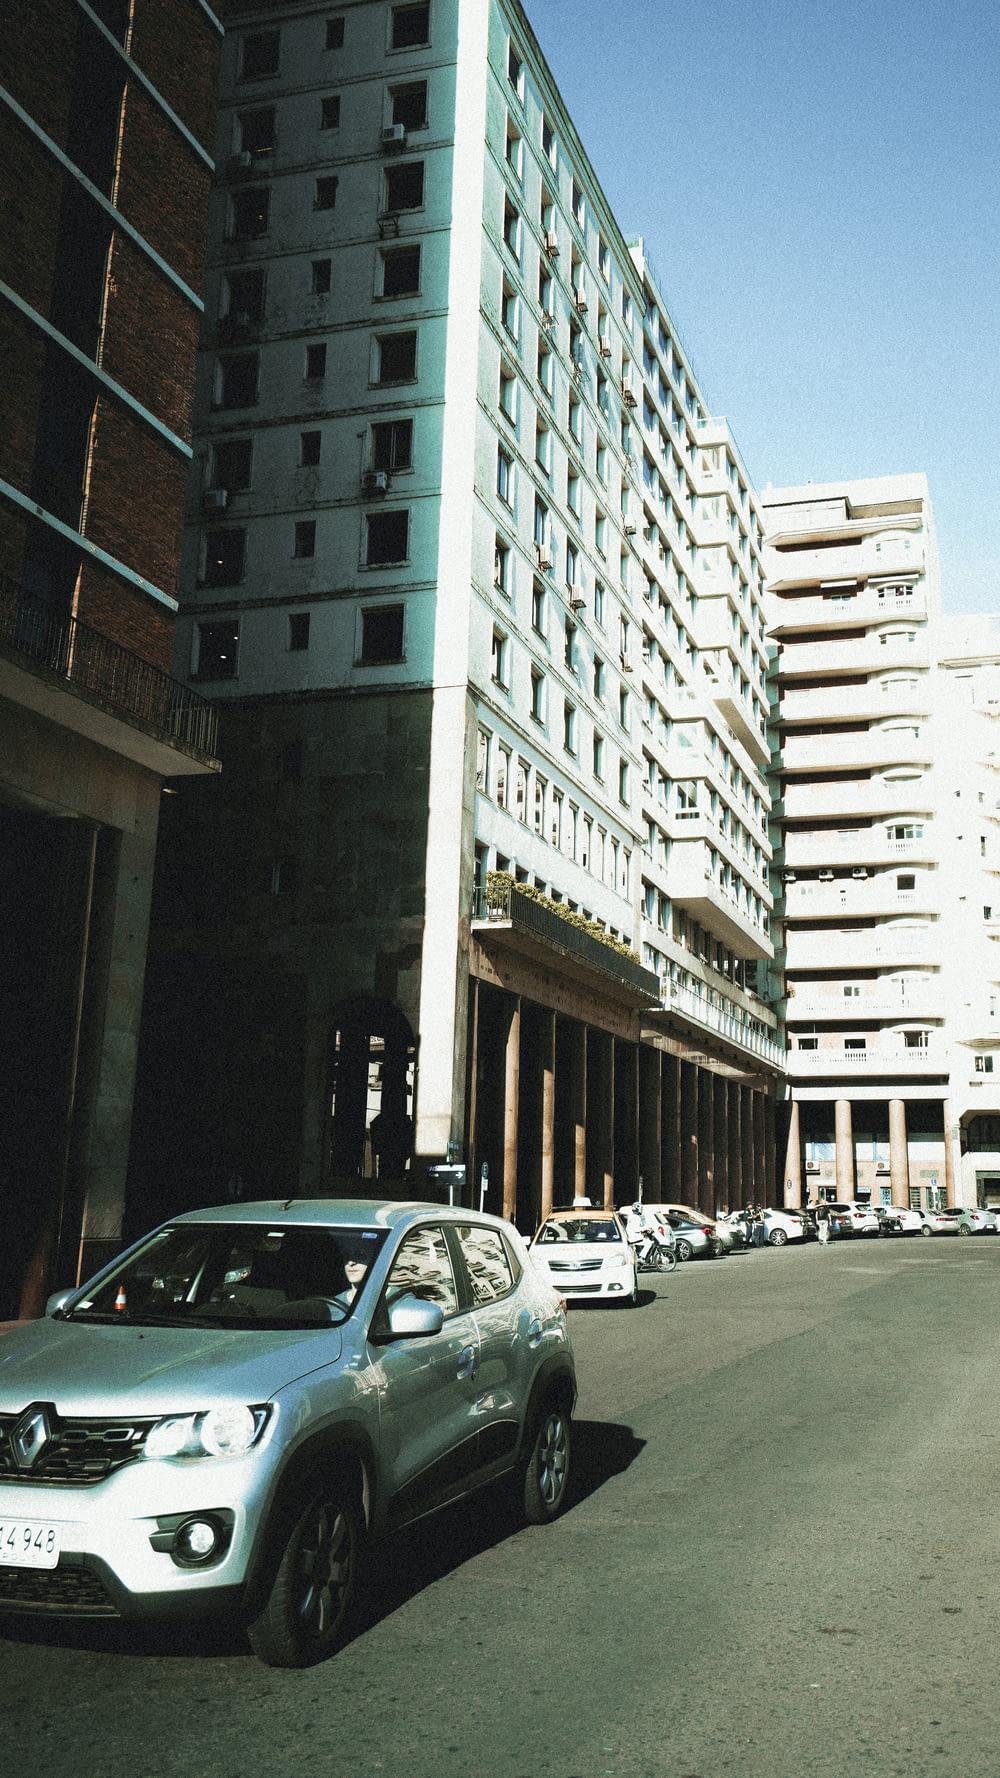 cars parked on the side of a road next to a tall building